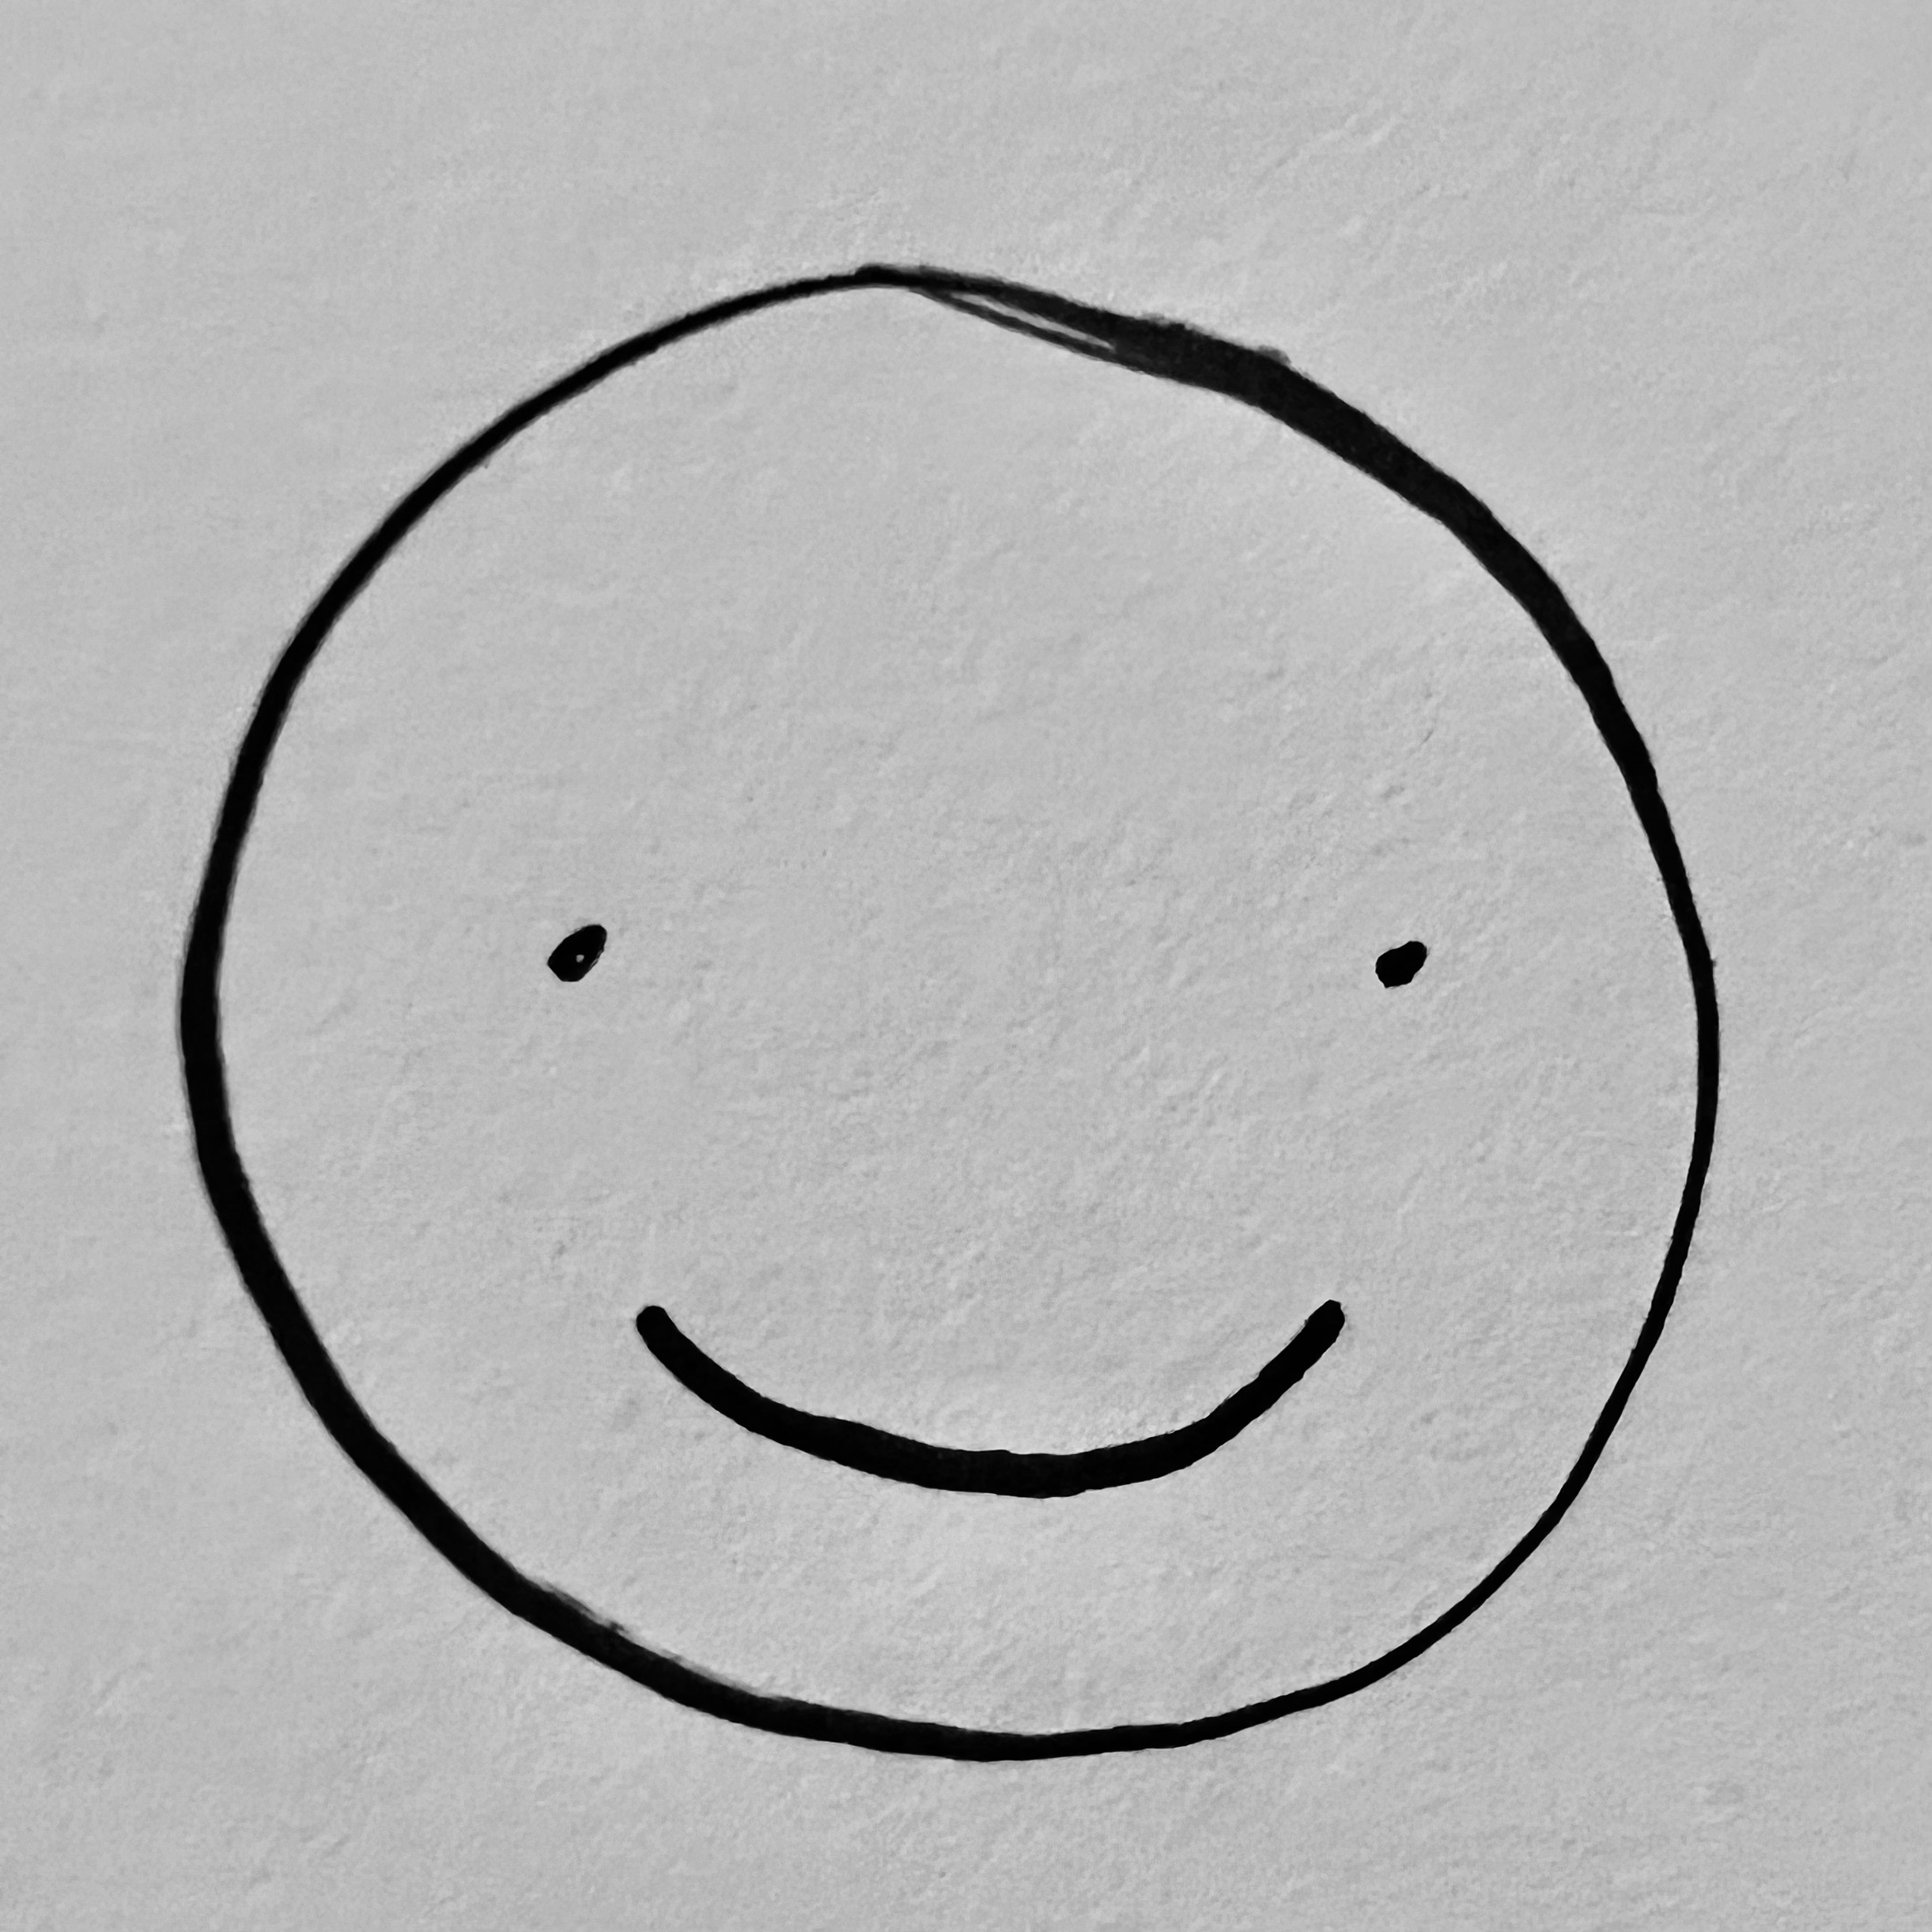 An image of a smiley face.